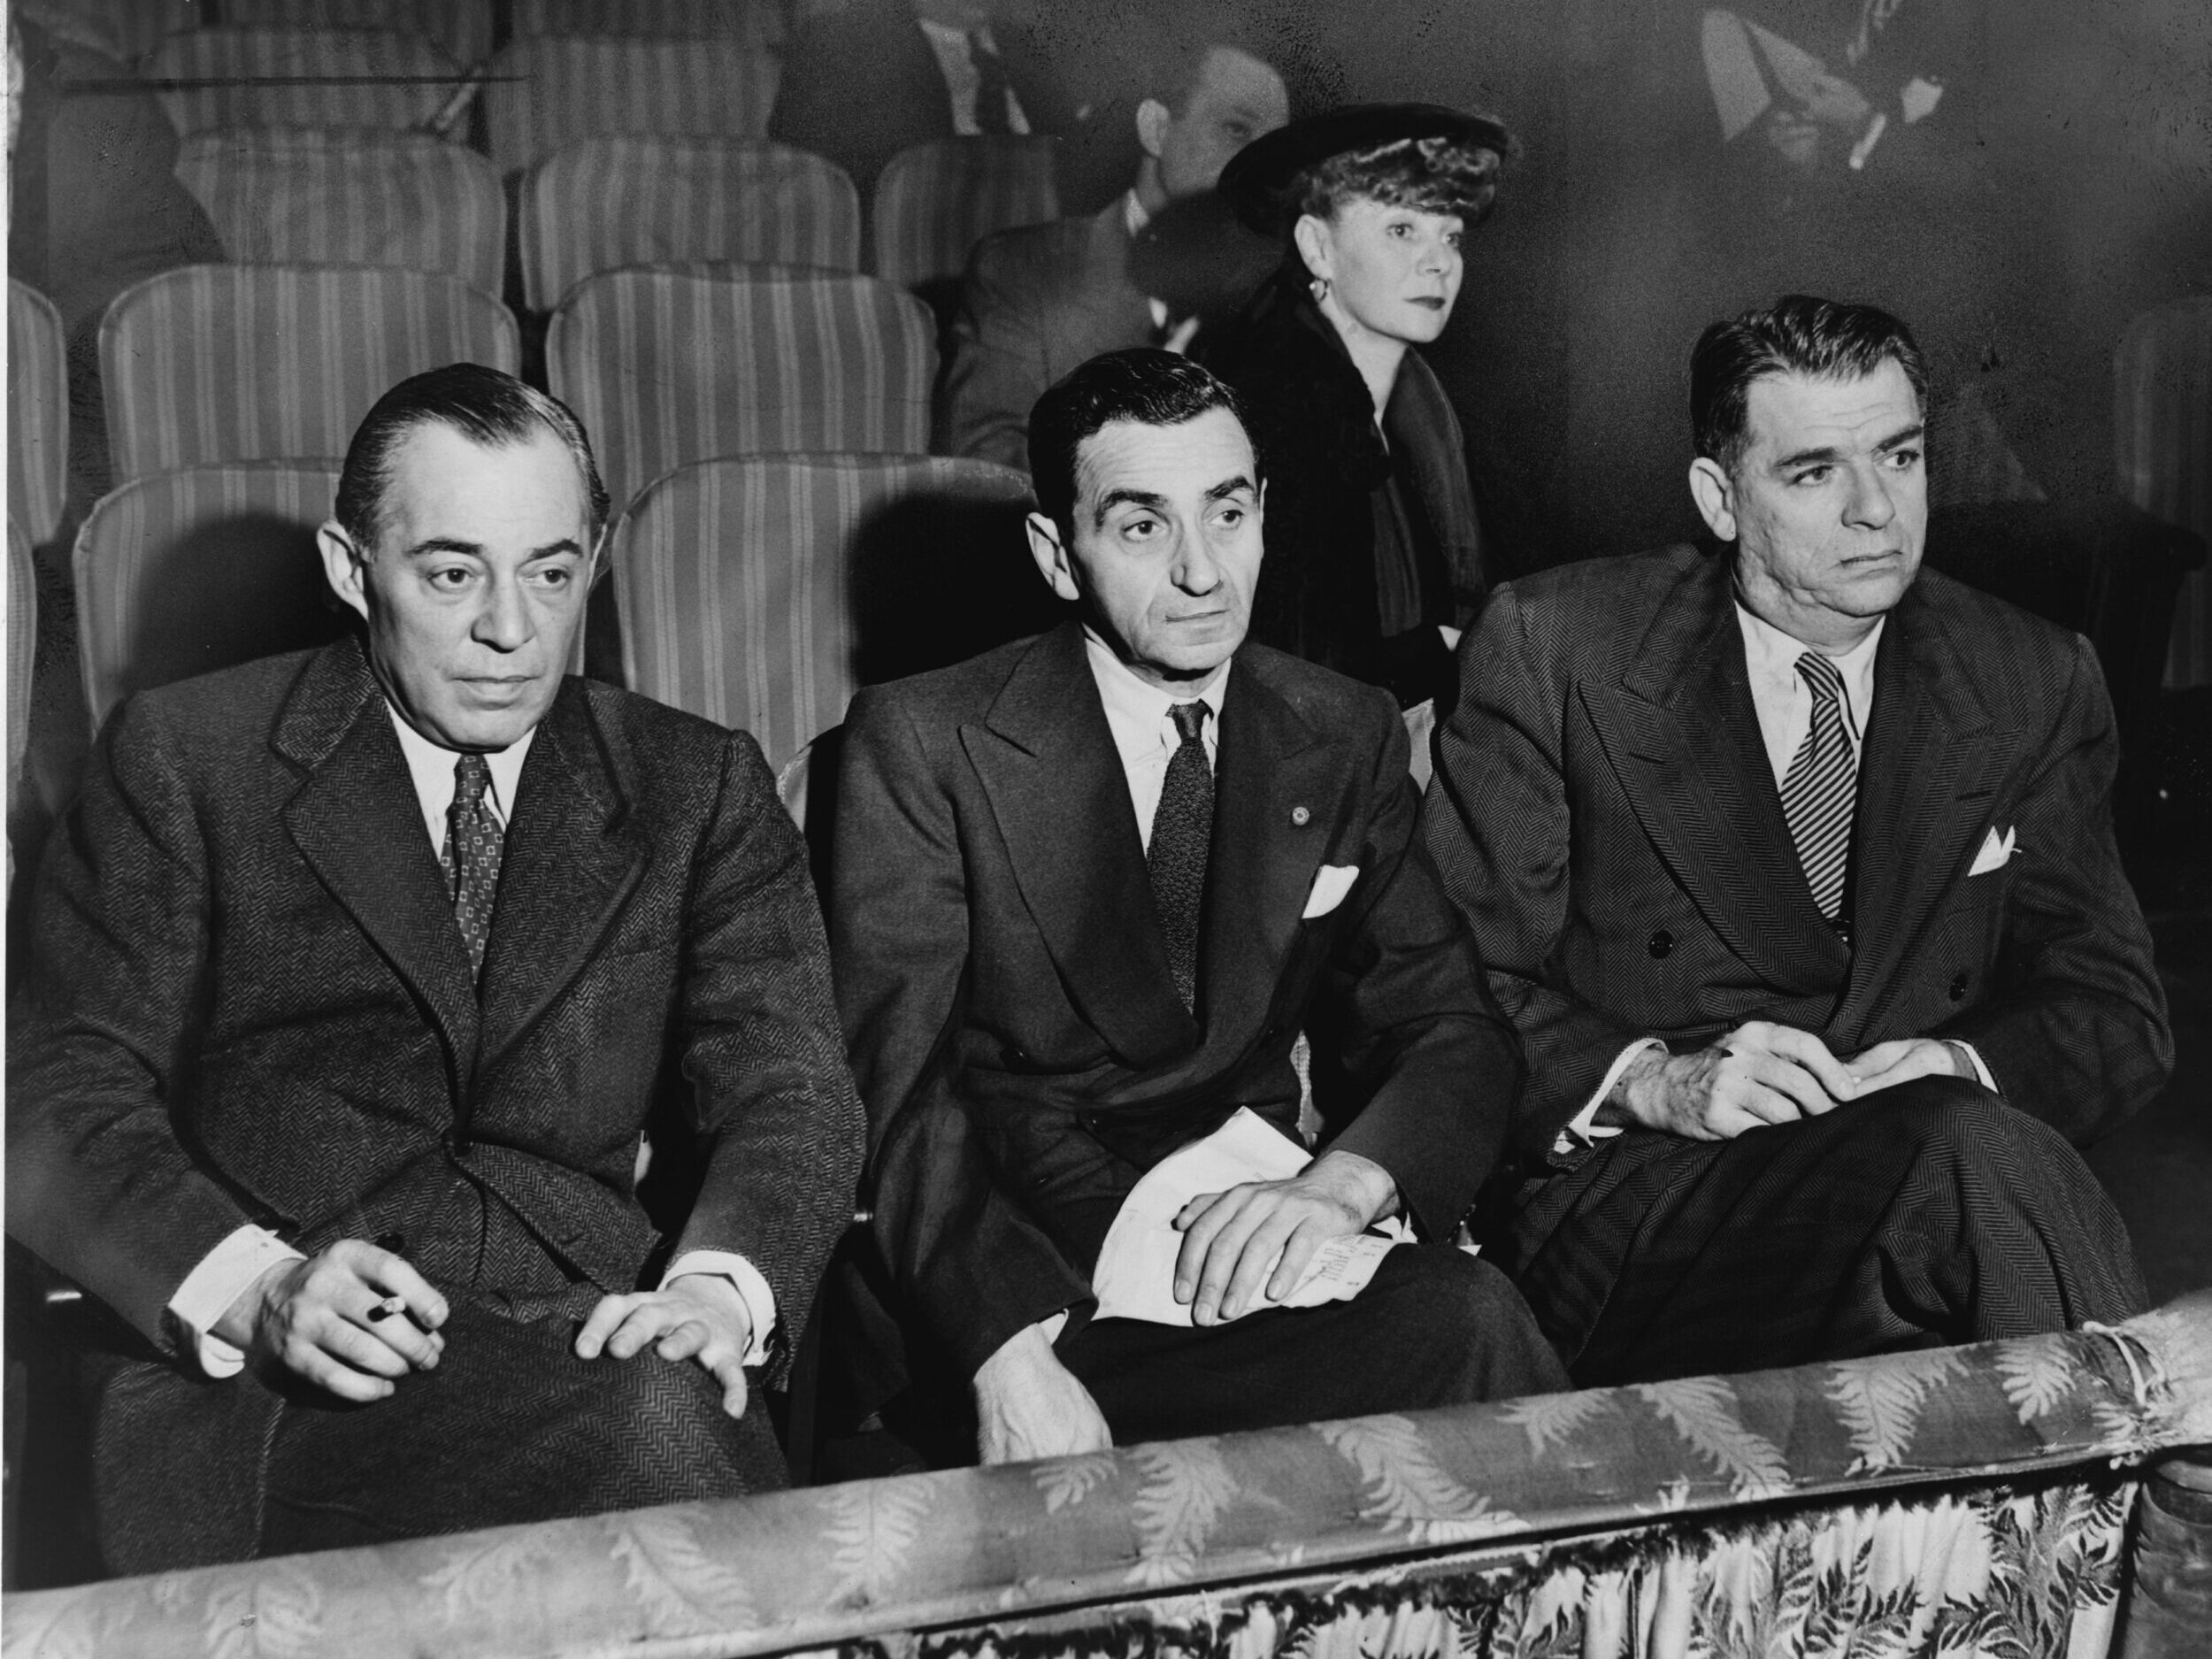 Richard Rodgers, Irving Berlin and Oscar Hammerstein II during rehearsals, 1946